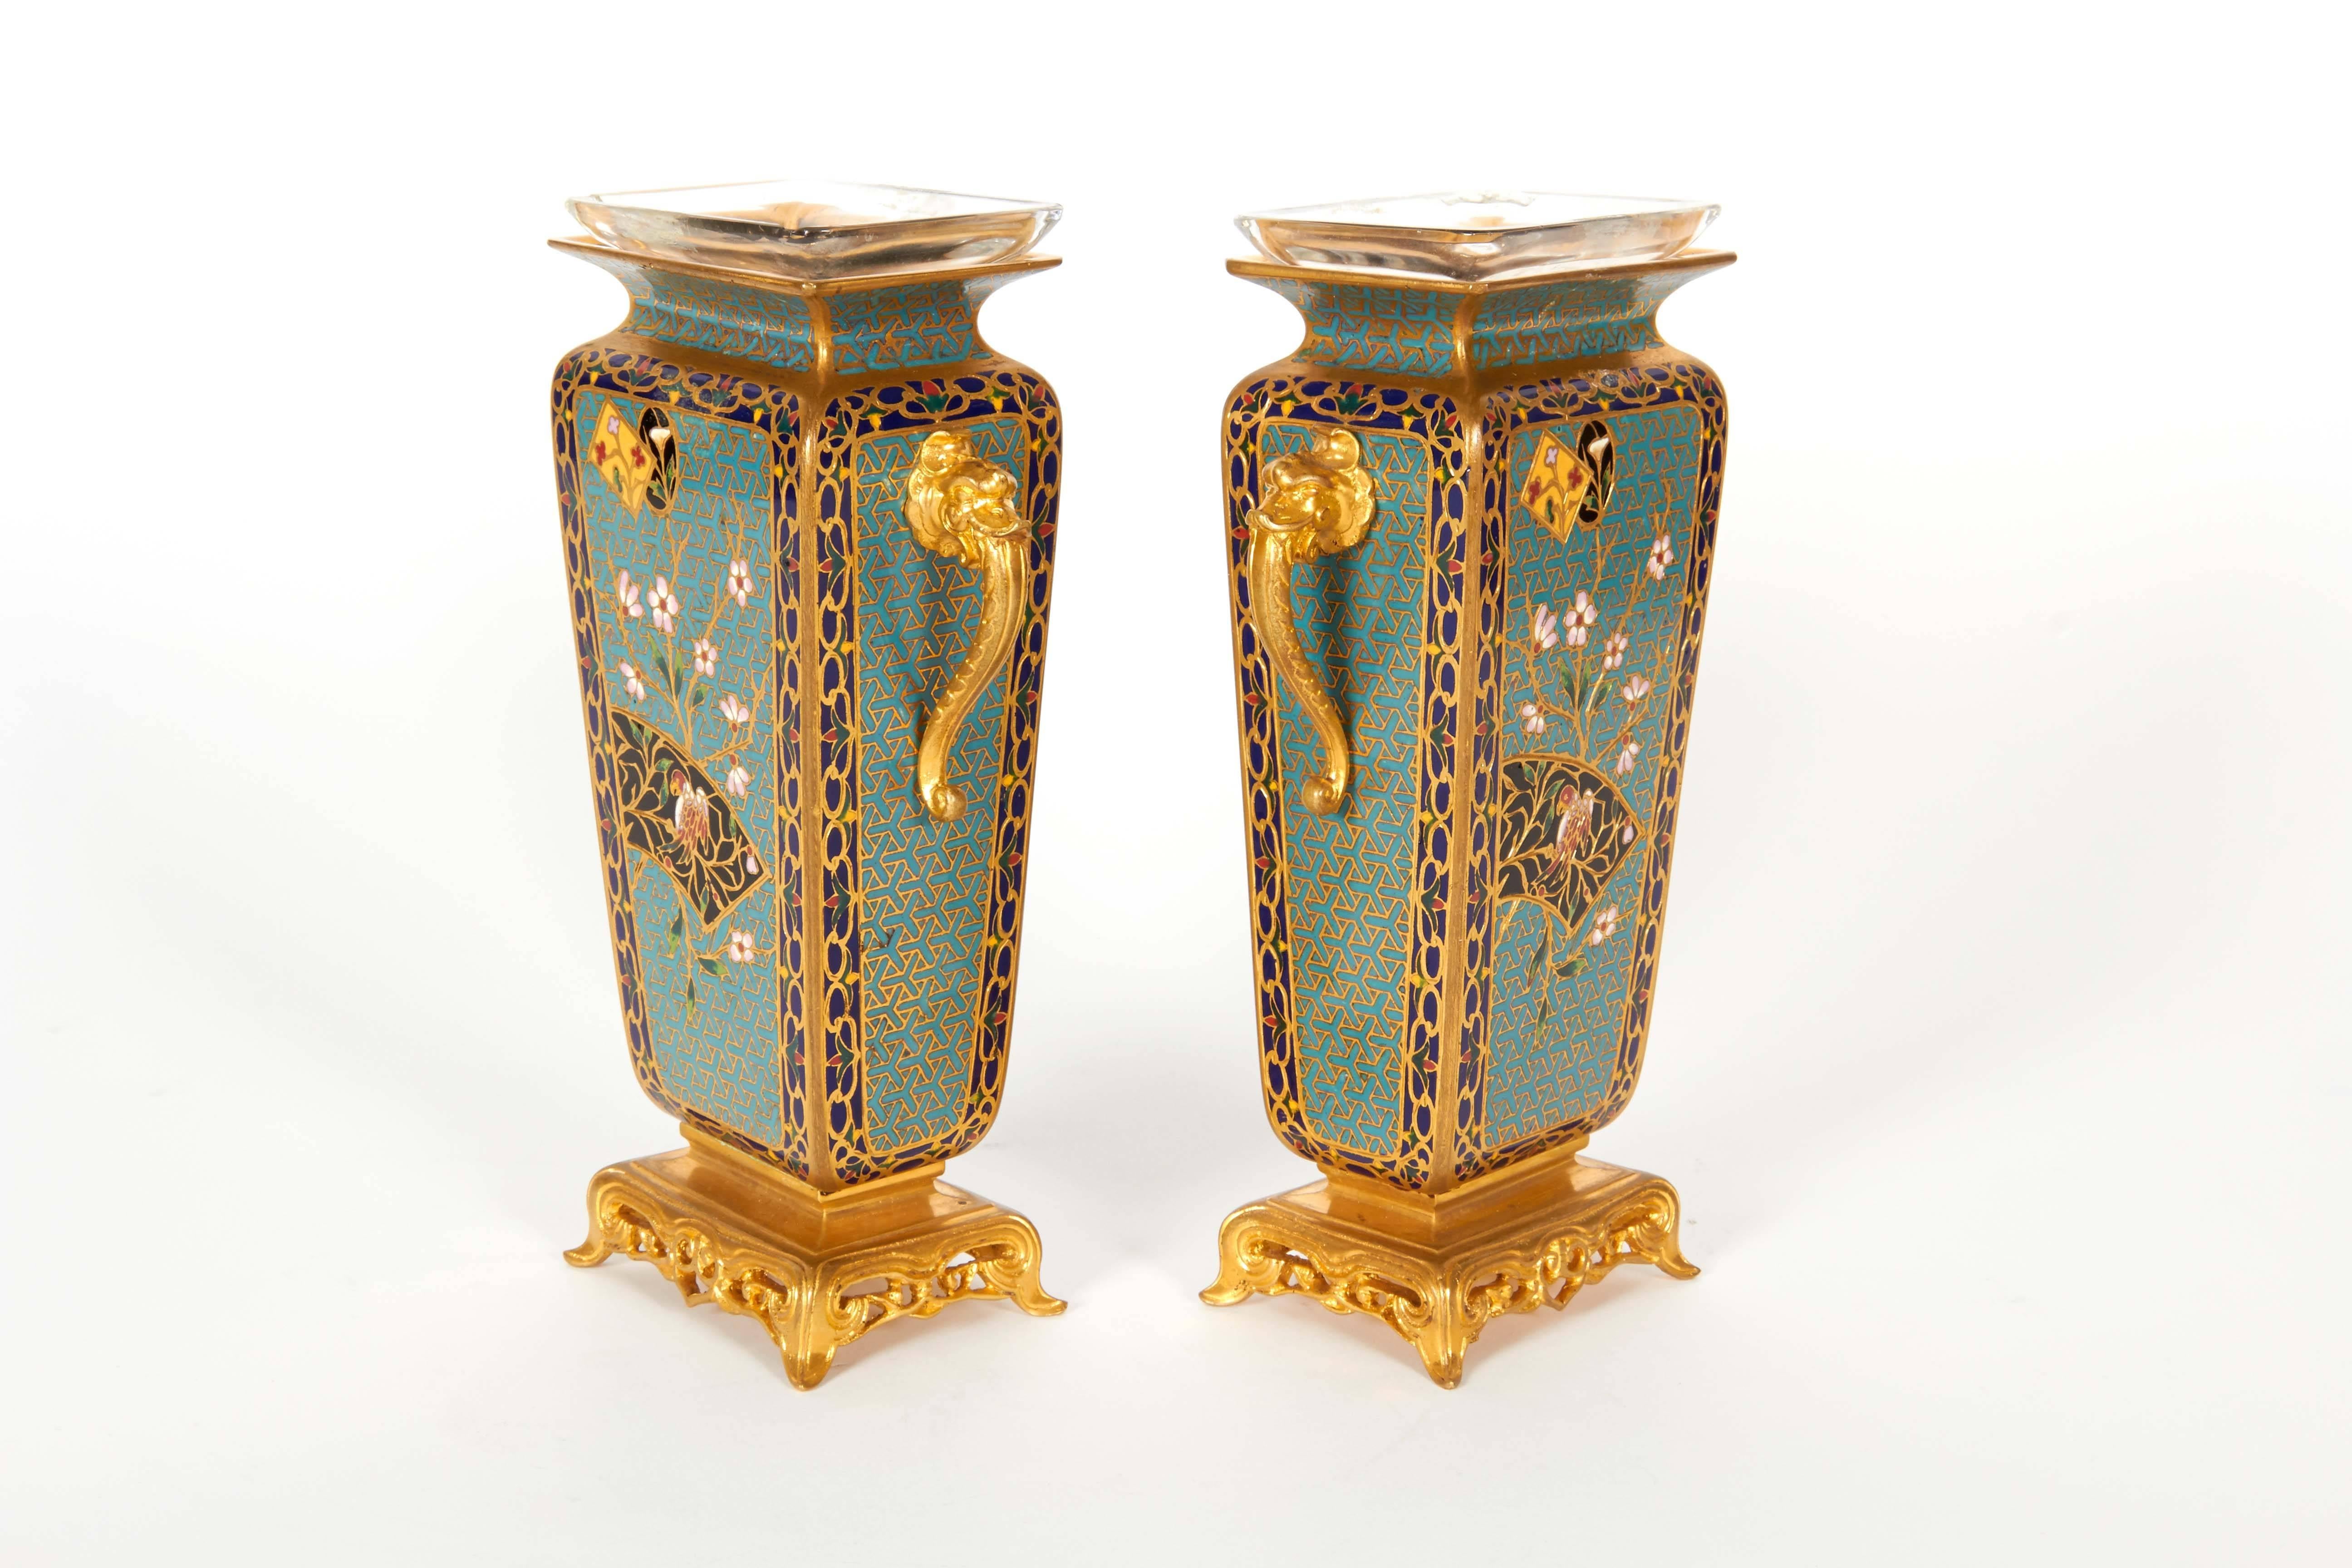 Bronze Pair of French Japonisme Ormolu and Champlevé Cloisonné Enamel Vases